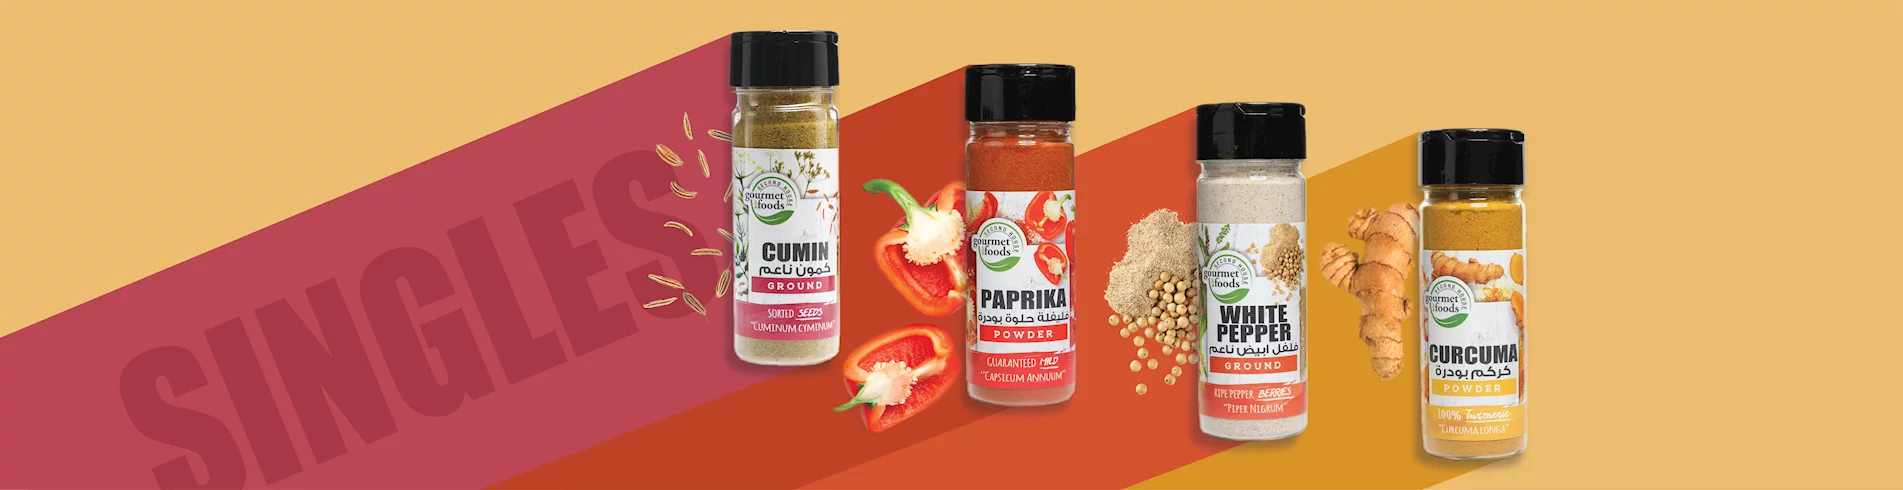 footer-Spice up your life with flavors that delight!